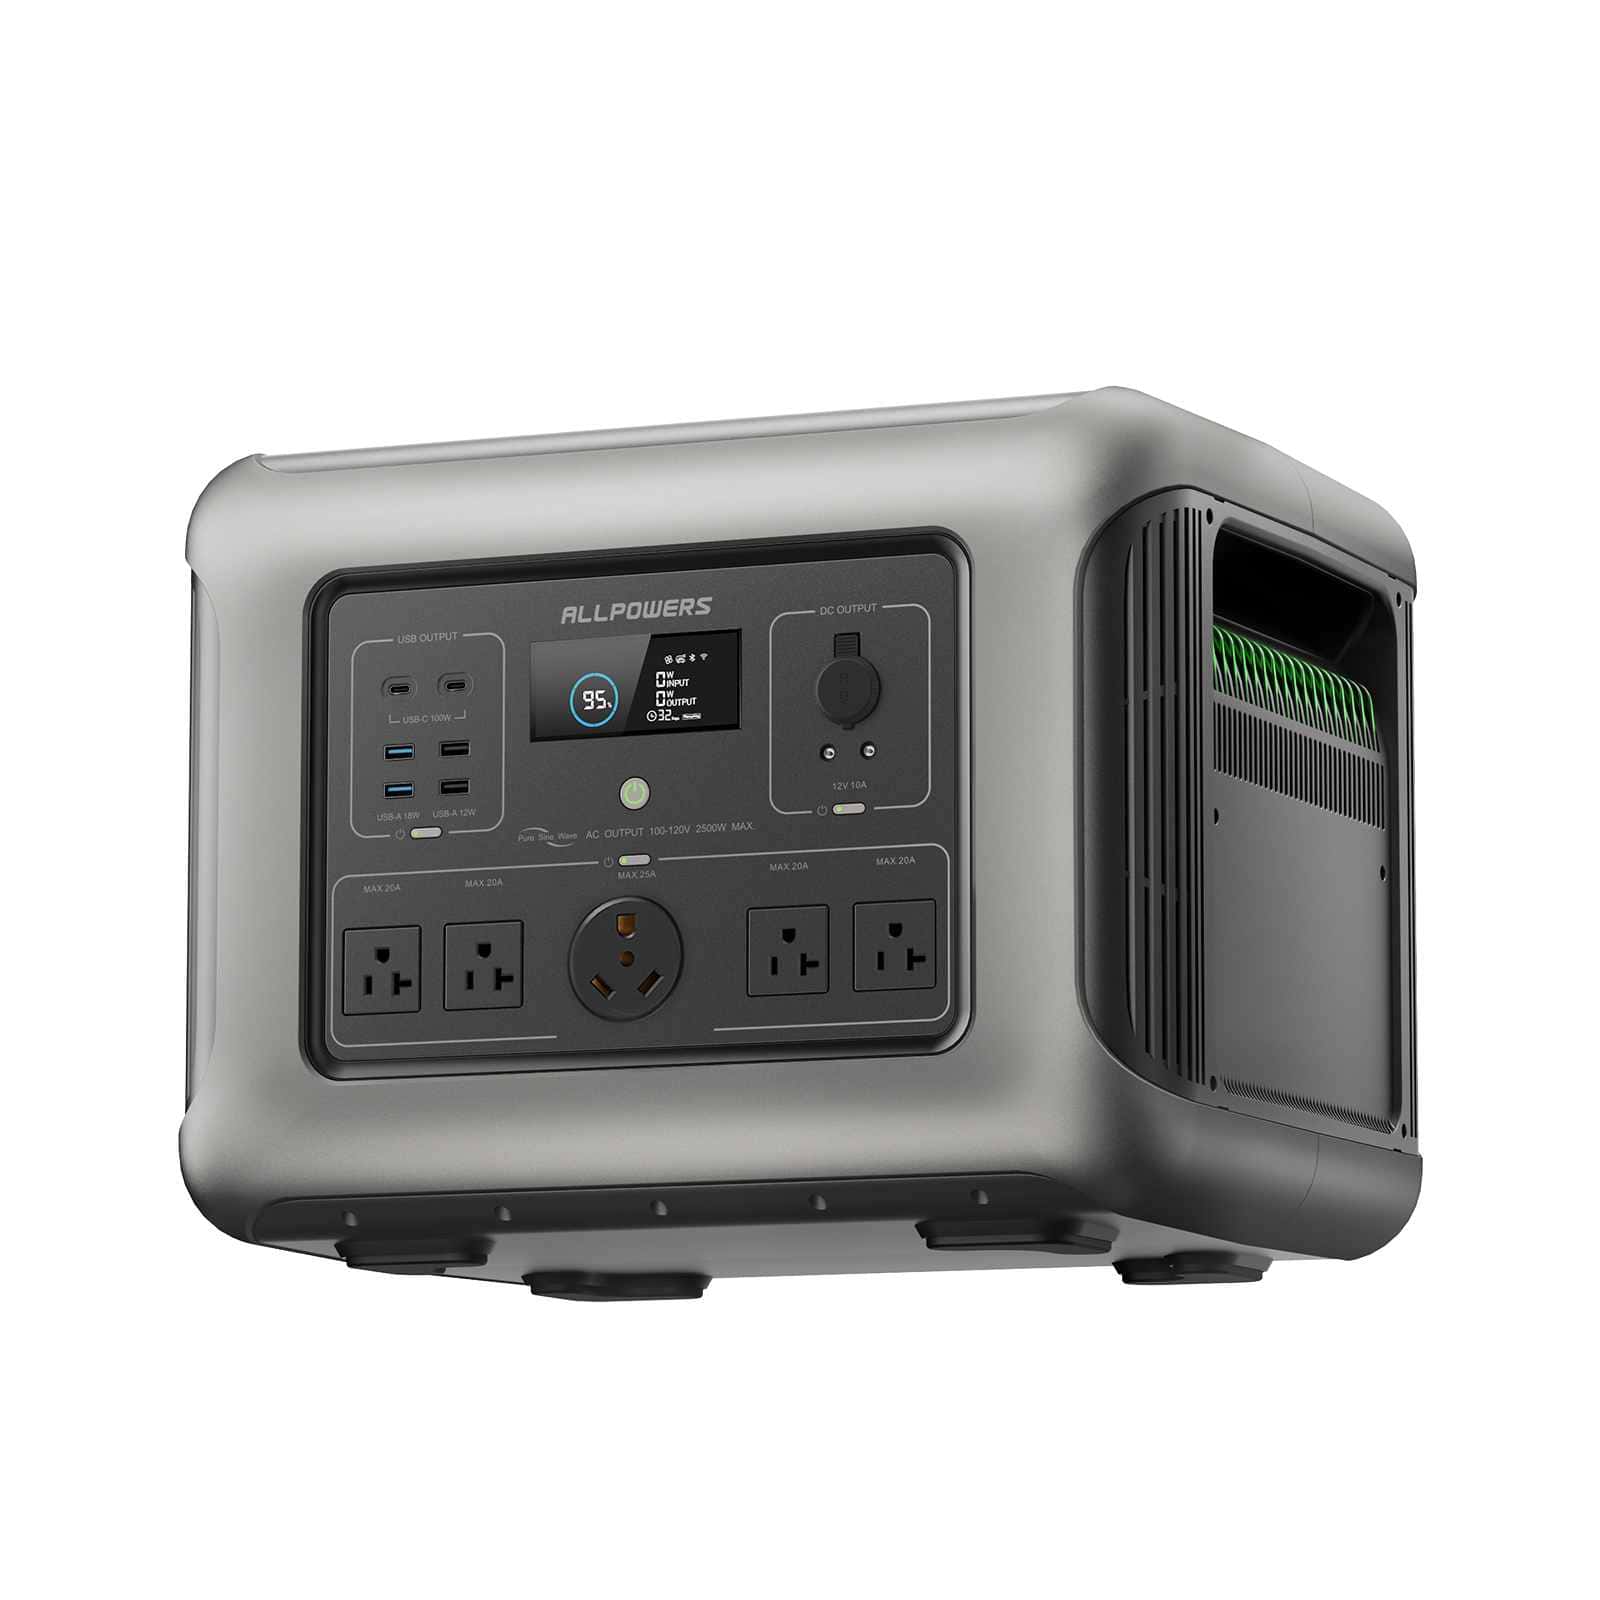 ALLPOWERS R2500 Portable Home Backup Power Station 2500W 2016Wh Review